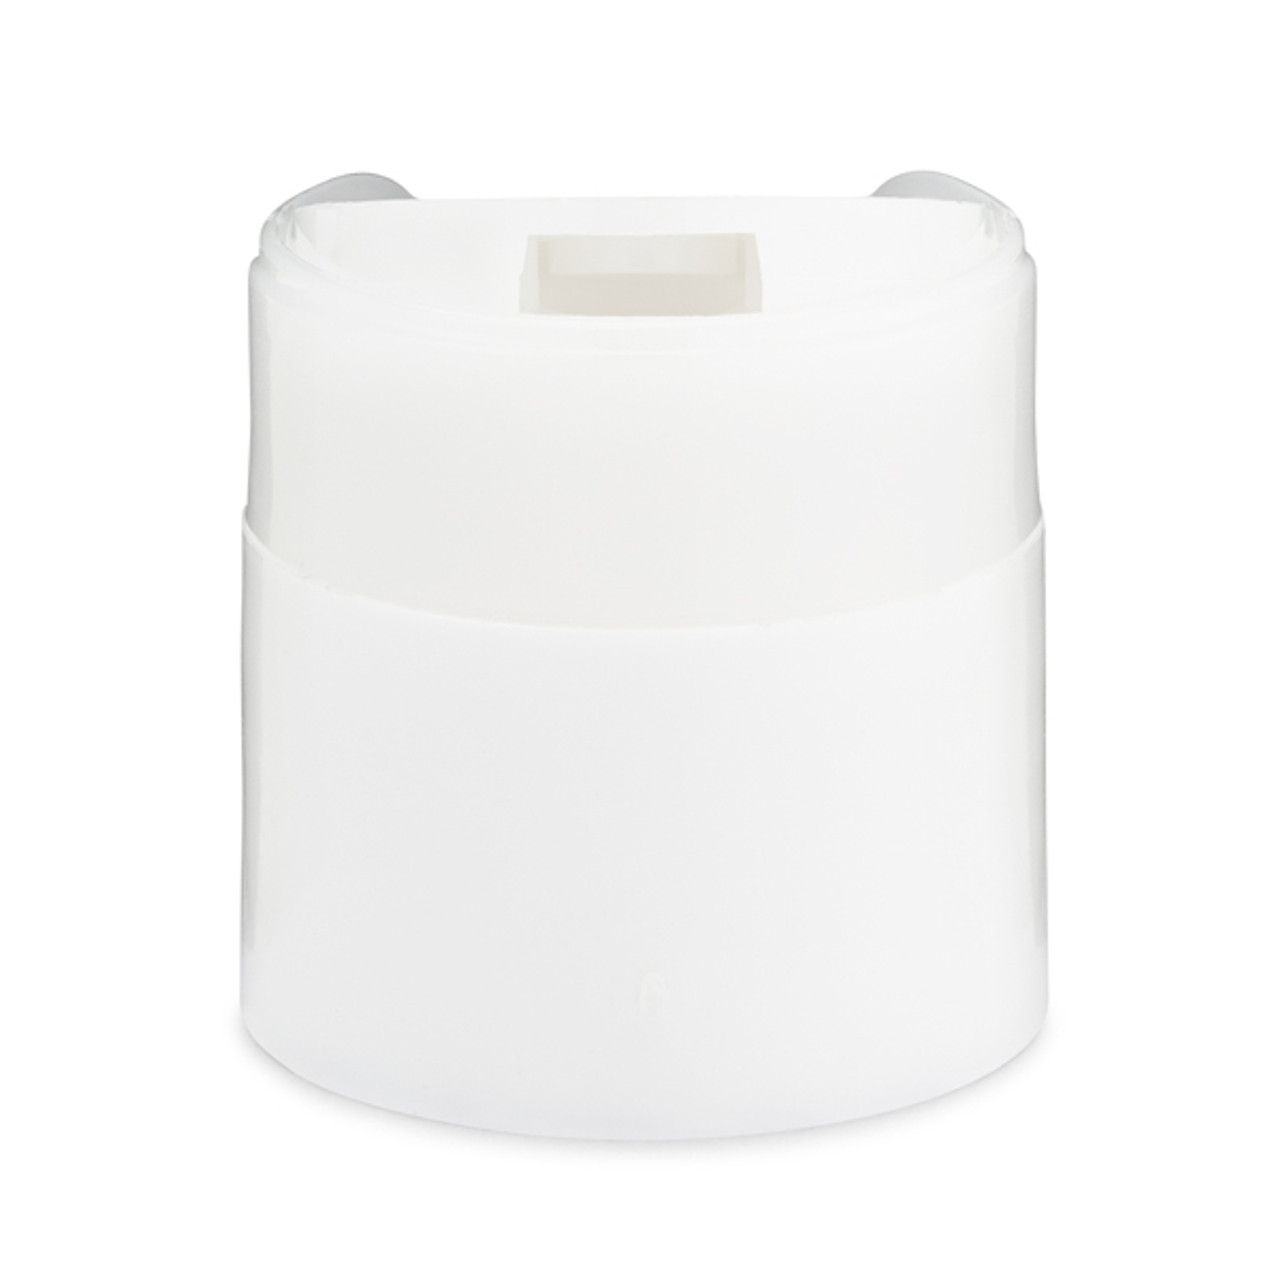 Press Disk Pack of 48 Please Make Sure The Bottle Opening is Exactly 20 mm, WM - 20/410 Replacement White Disc Top Closure 20/410, White, 48 